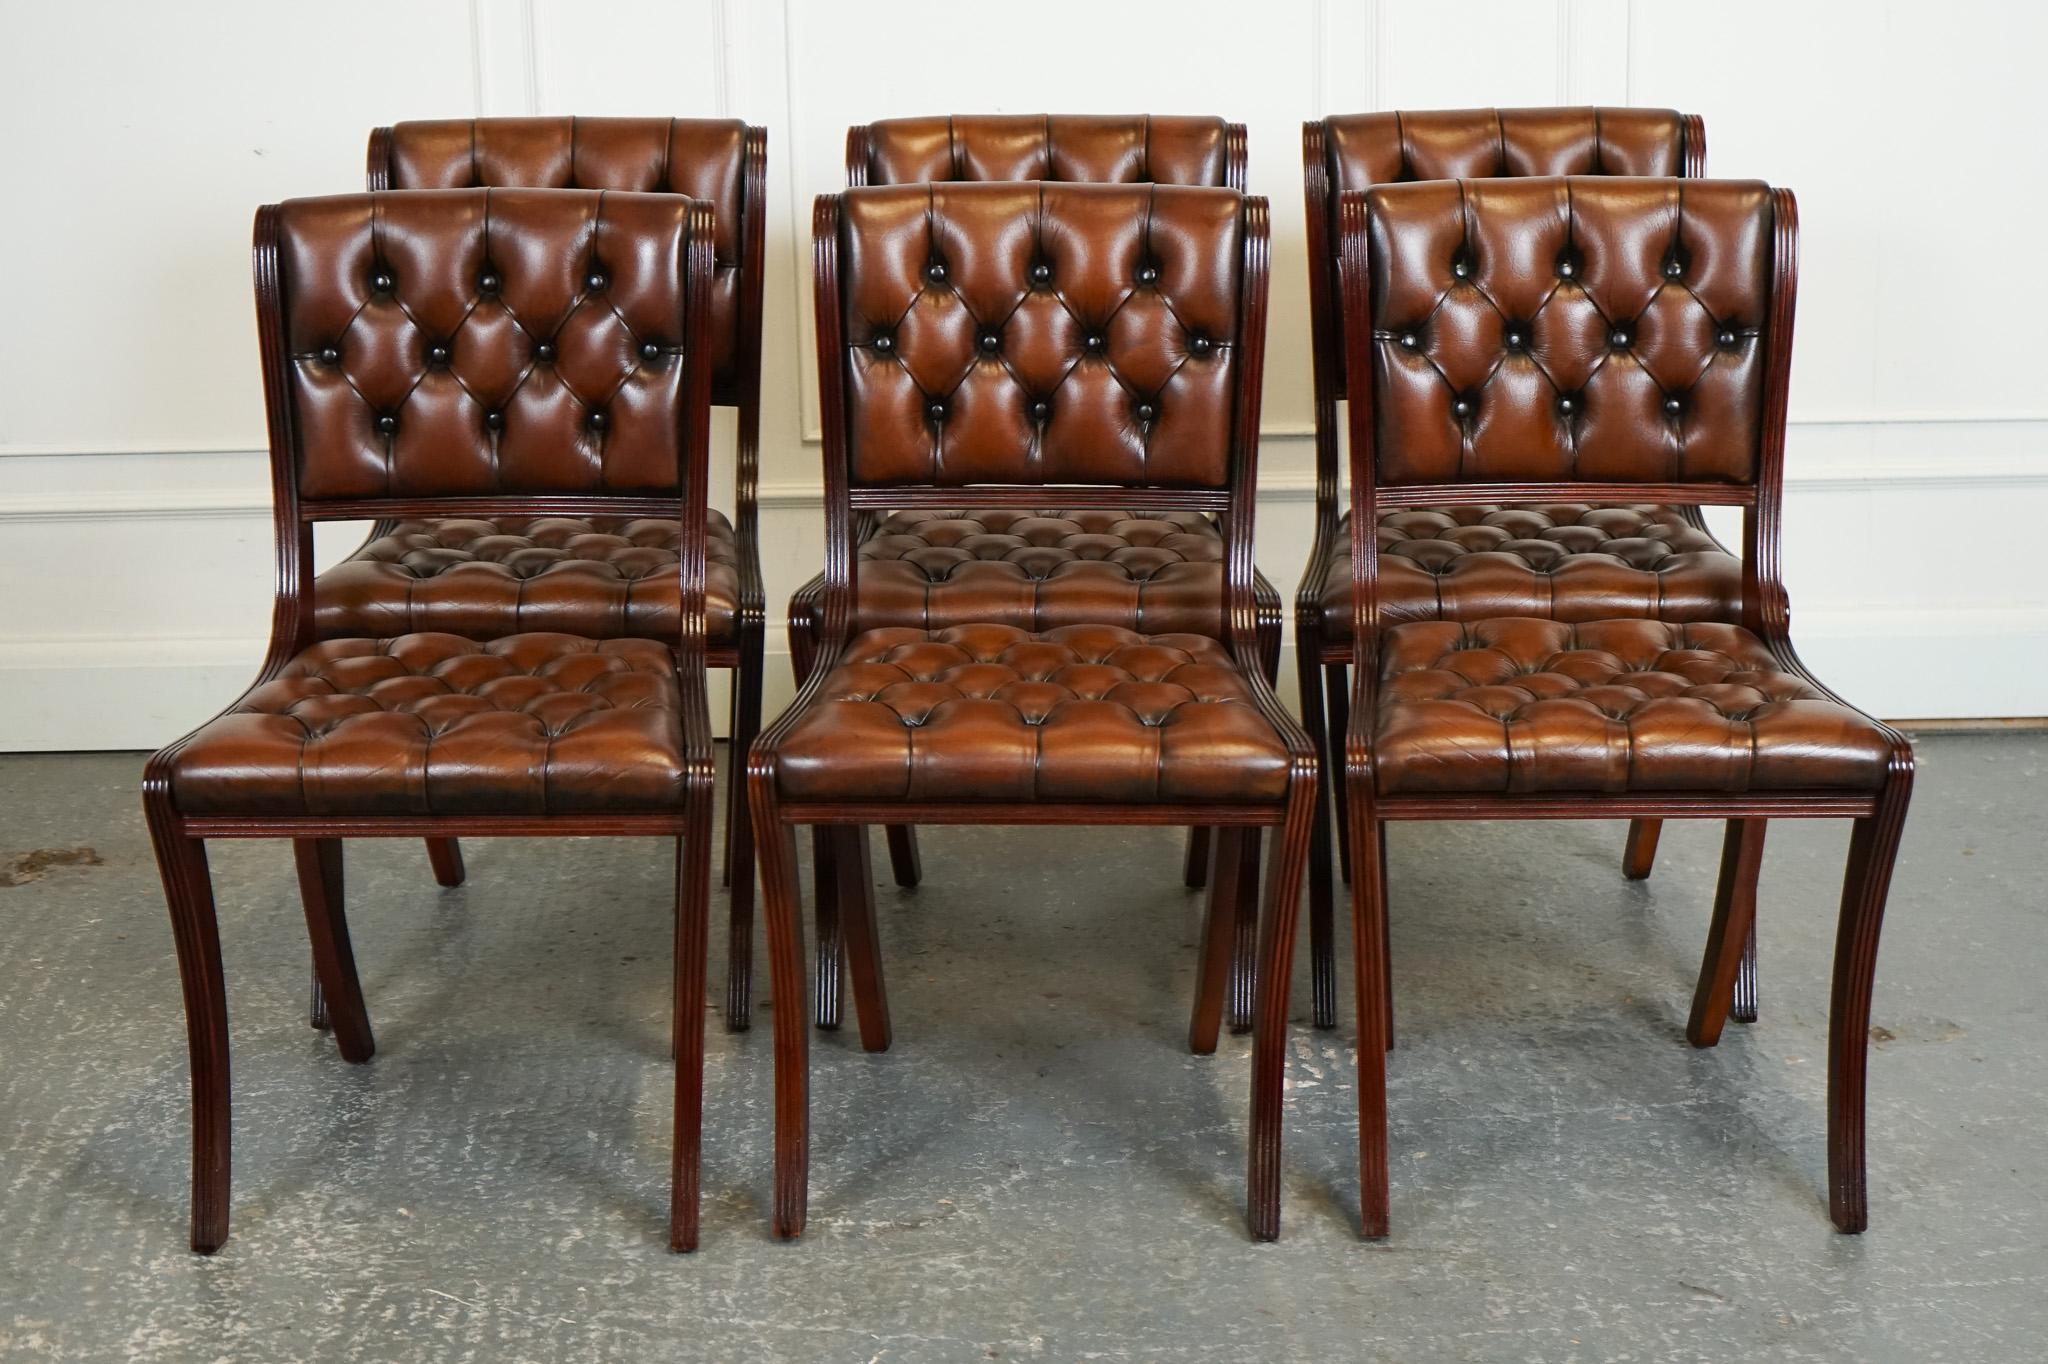 

We are delighted to offer for sale this Stunning Set of Six Vintage Fully Restored Chesterfield Aged Cigar Brown Leather Dining Chairs.

A very good looking and well made suite, they have reeded frames running down from the back all the way to the